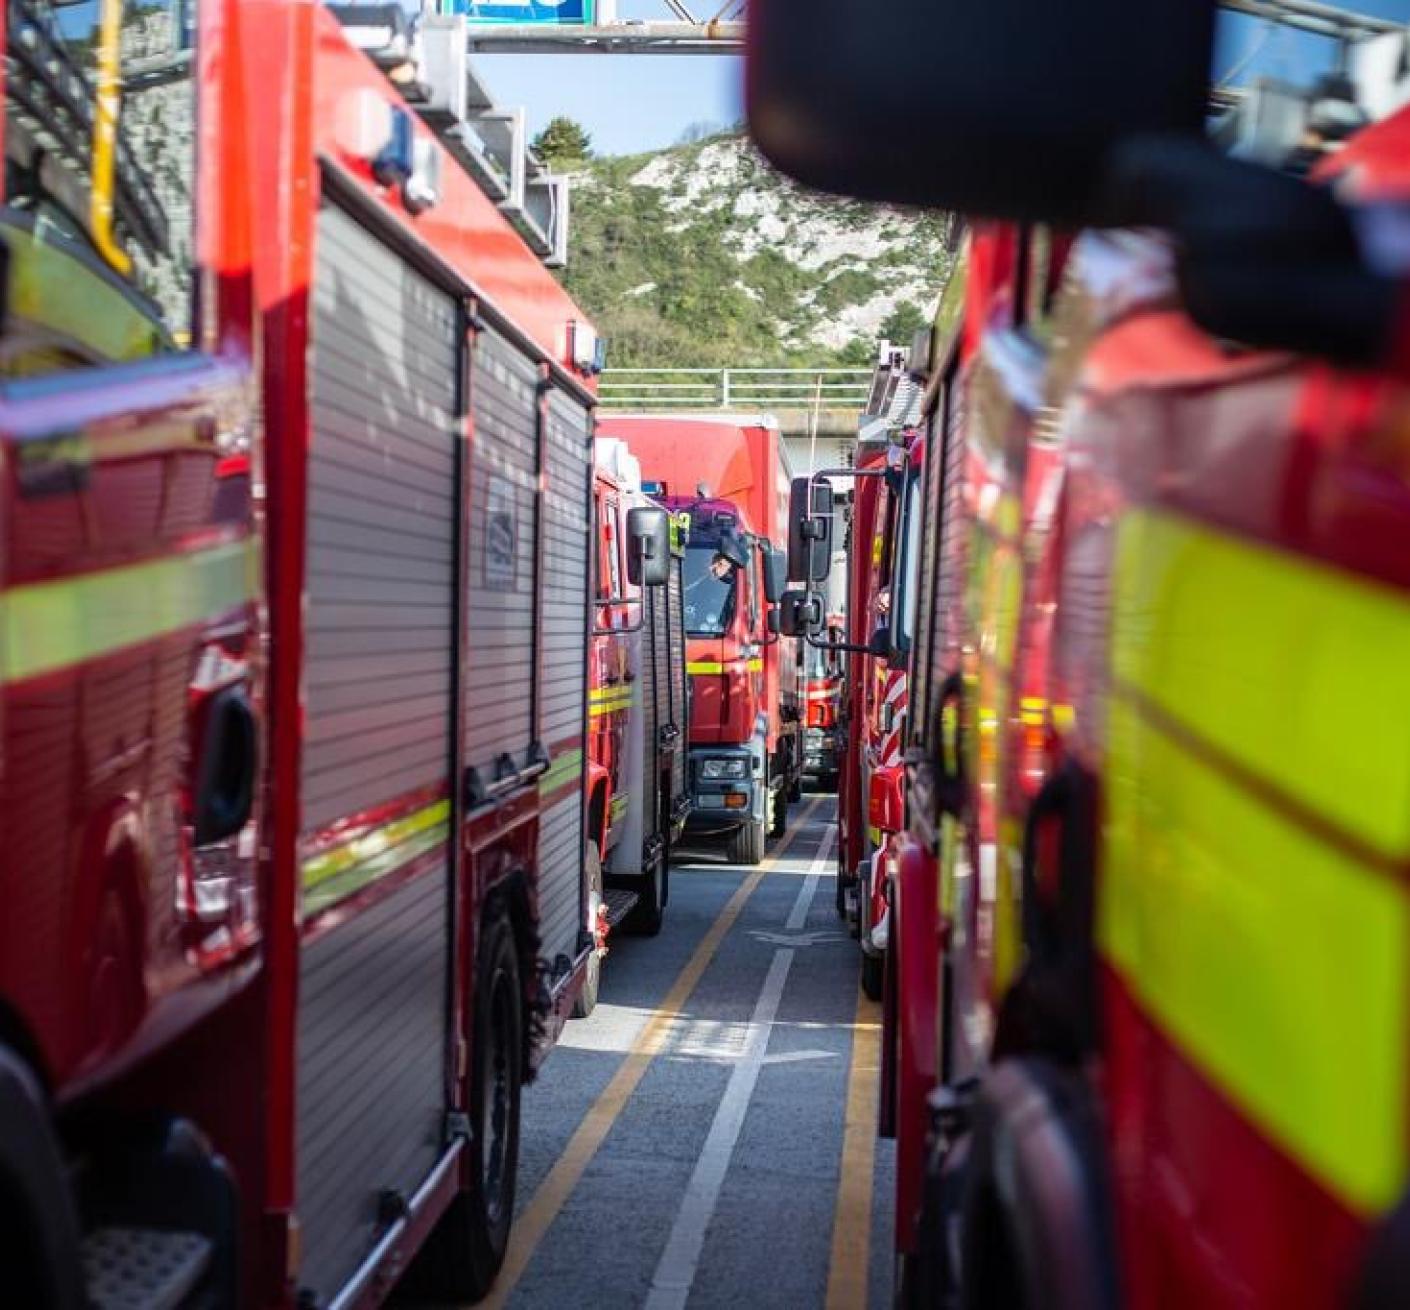 Fire and rescue service vehicles parked up in convoy - close up